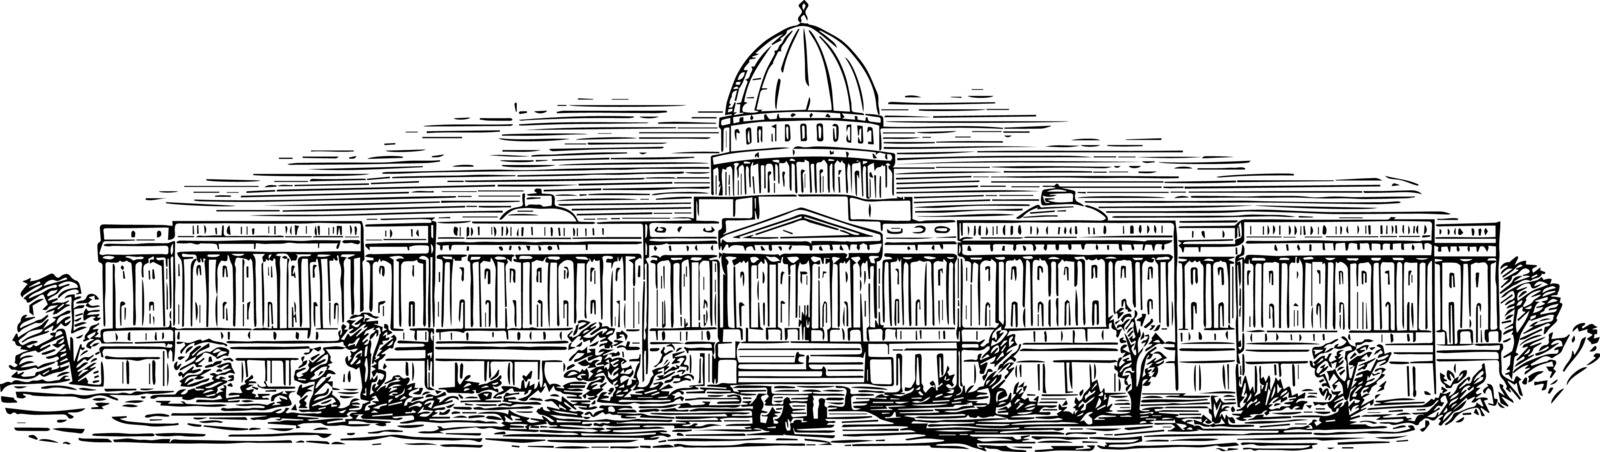 Capitol building covers 1.5 million square feet, 600 rooms and miles of corridors vintage line drawing.